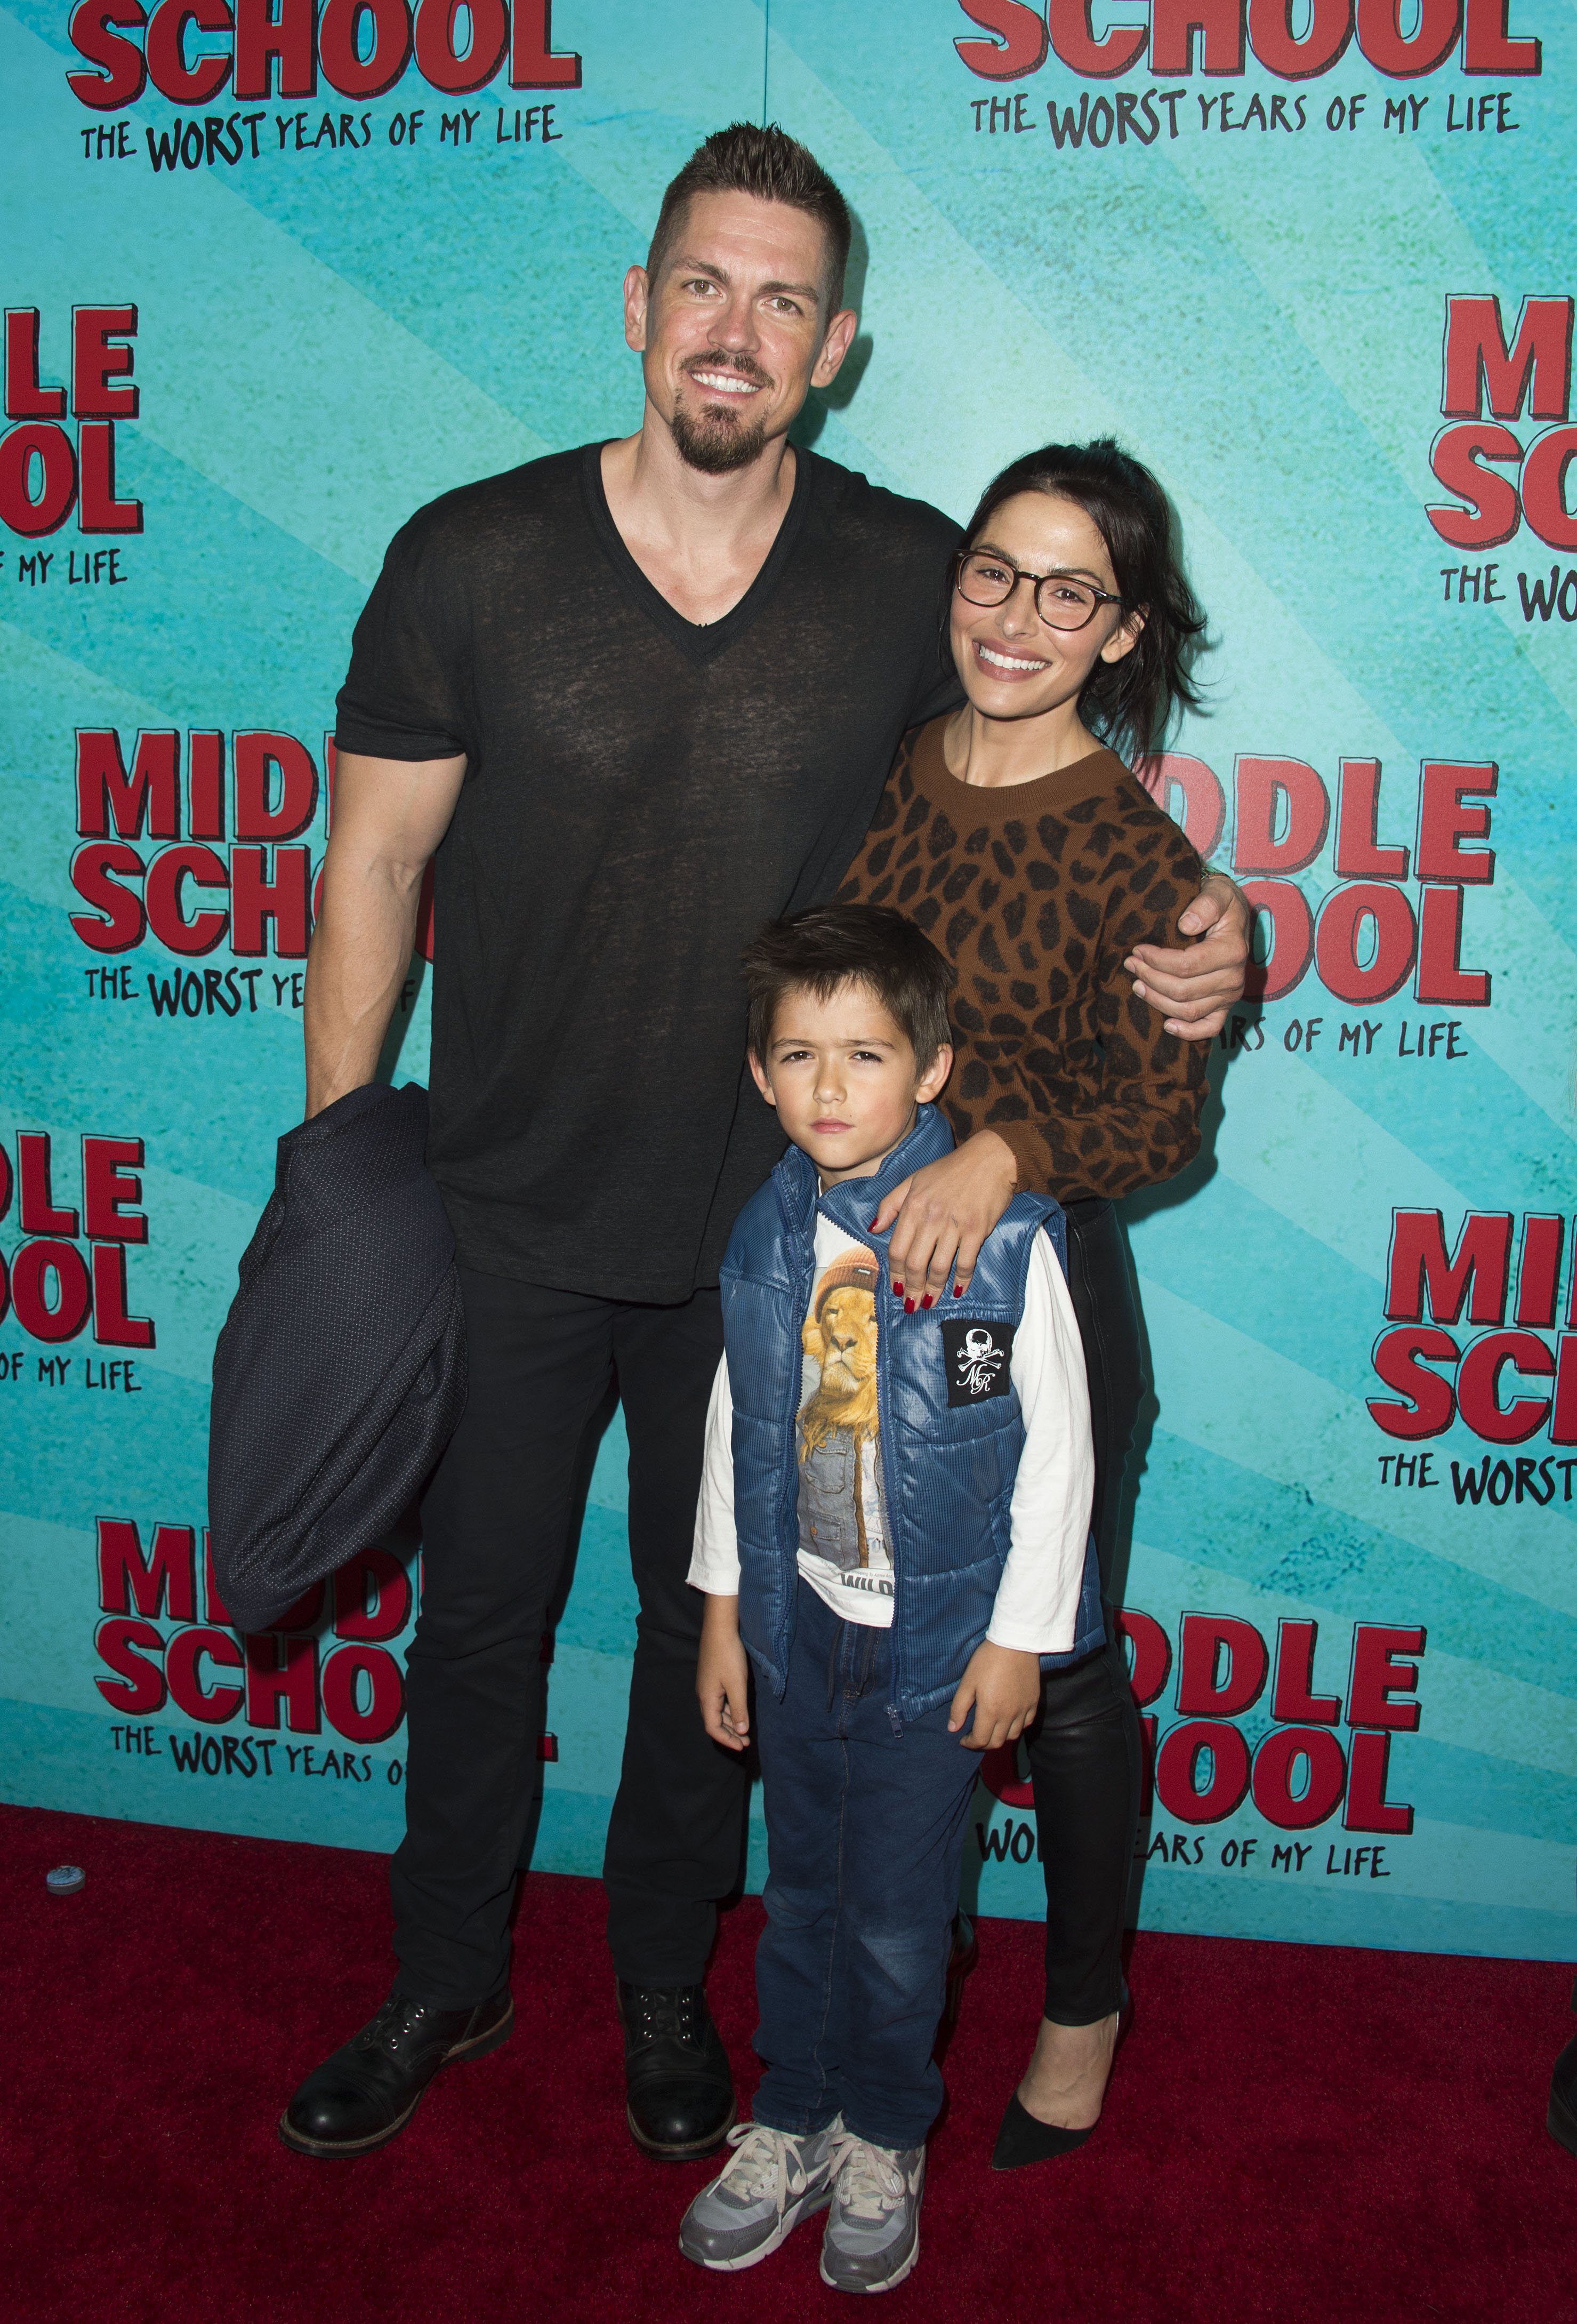 Steve Howey, Sarah Shahi, and William Wolf at the red carpet screening of "Middle School" on October 5, 2016 | Source: Getty Images